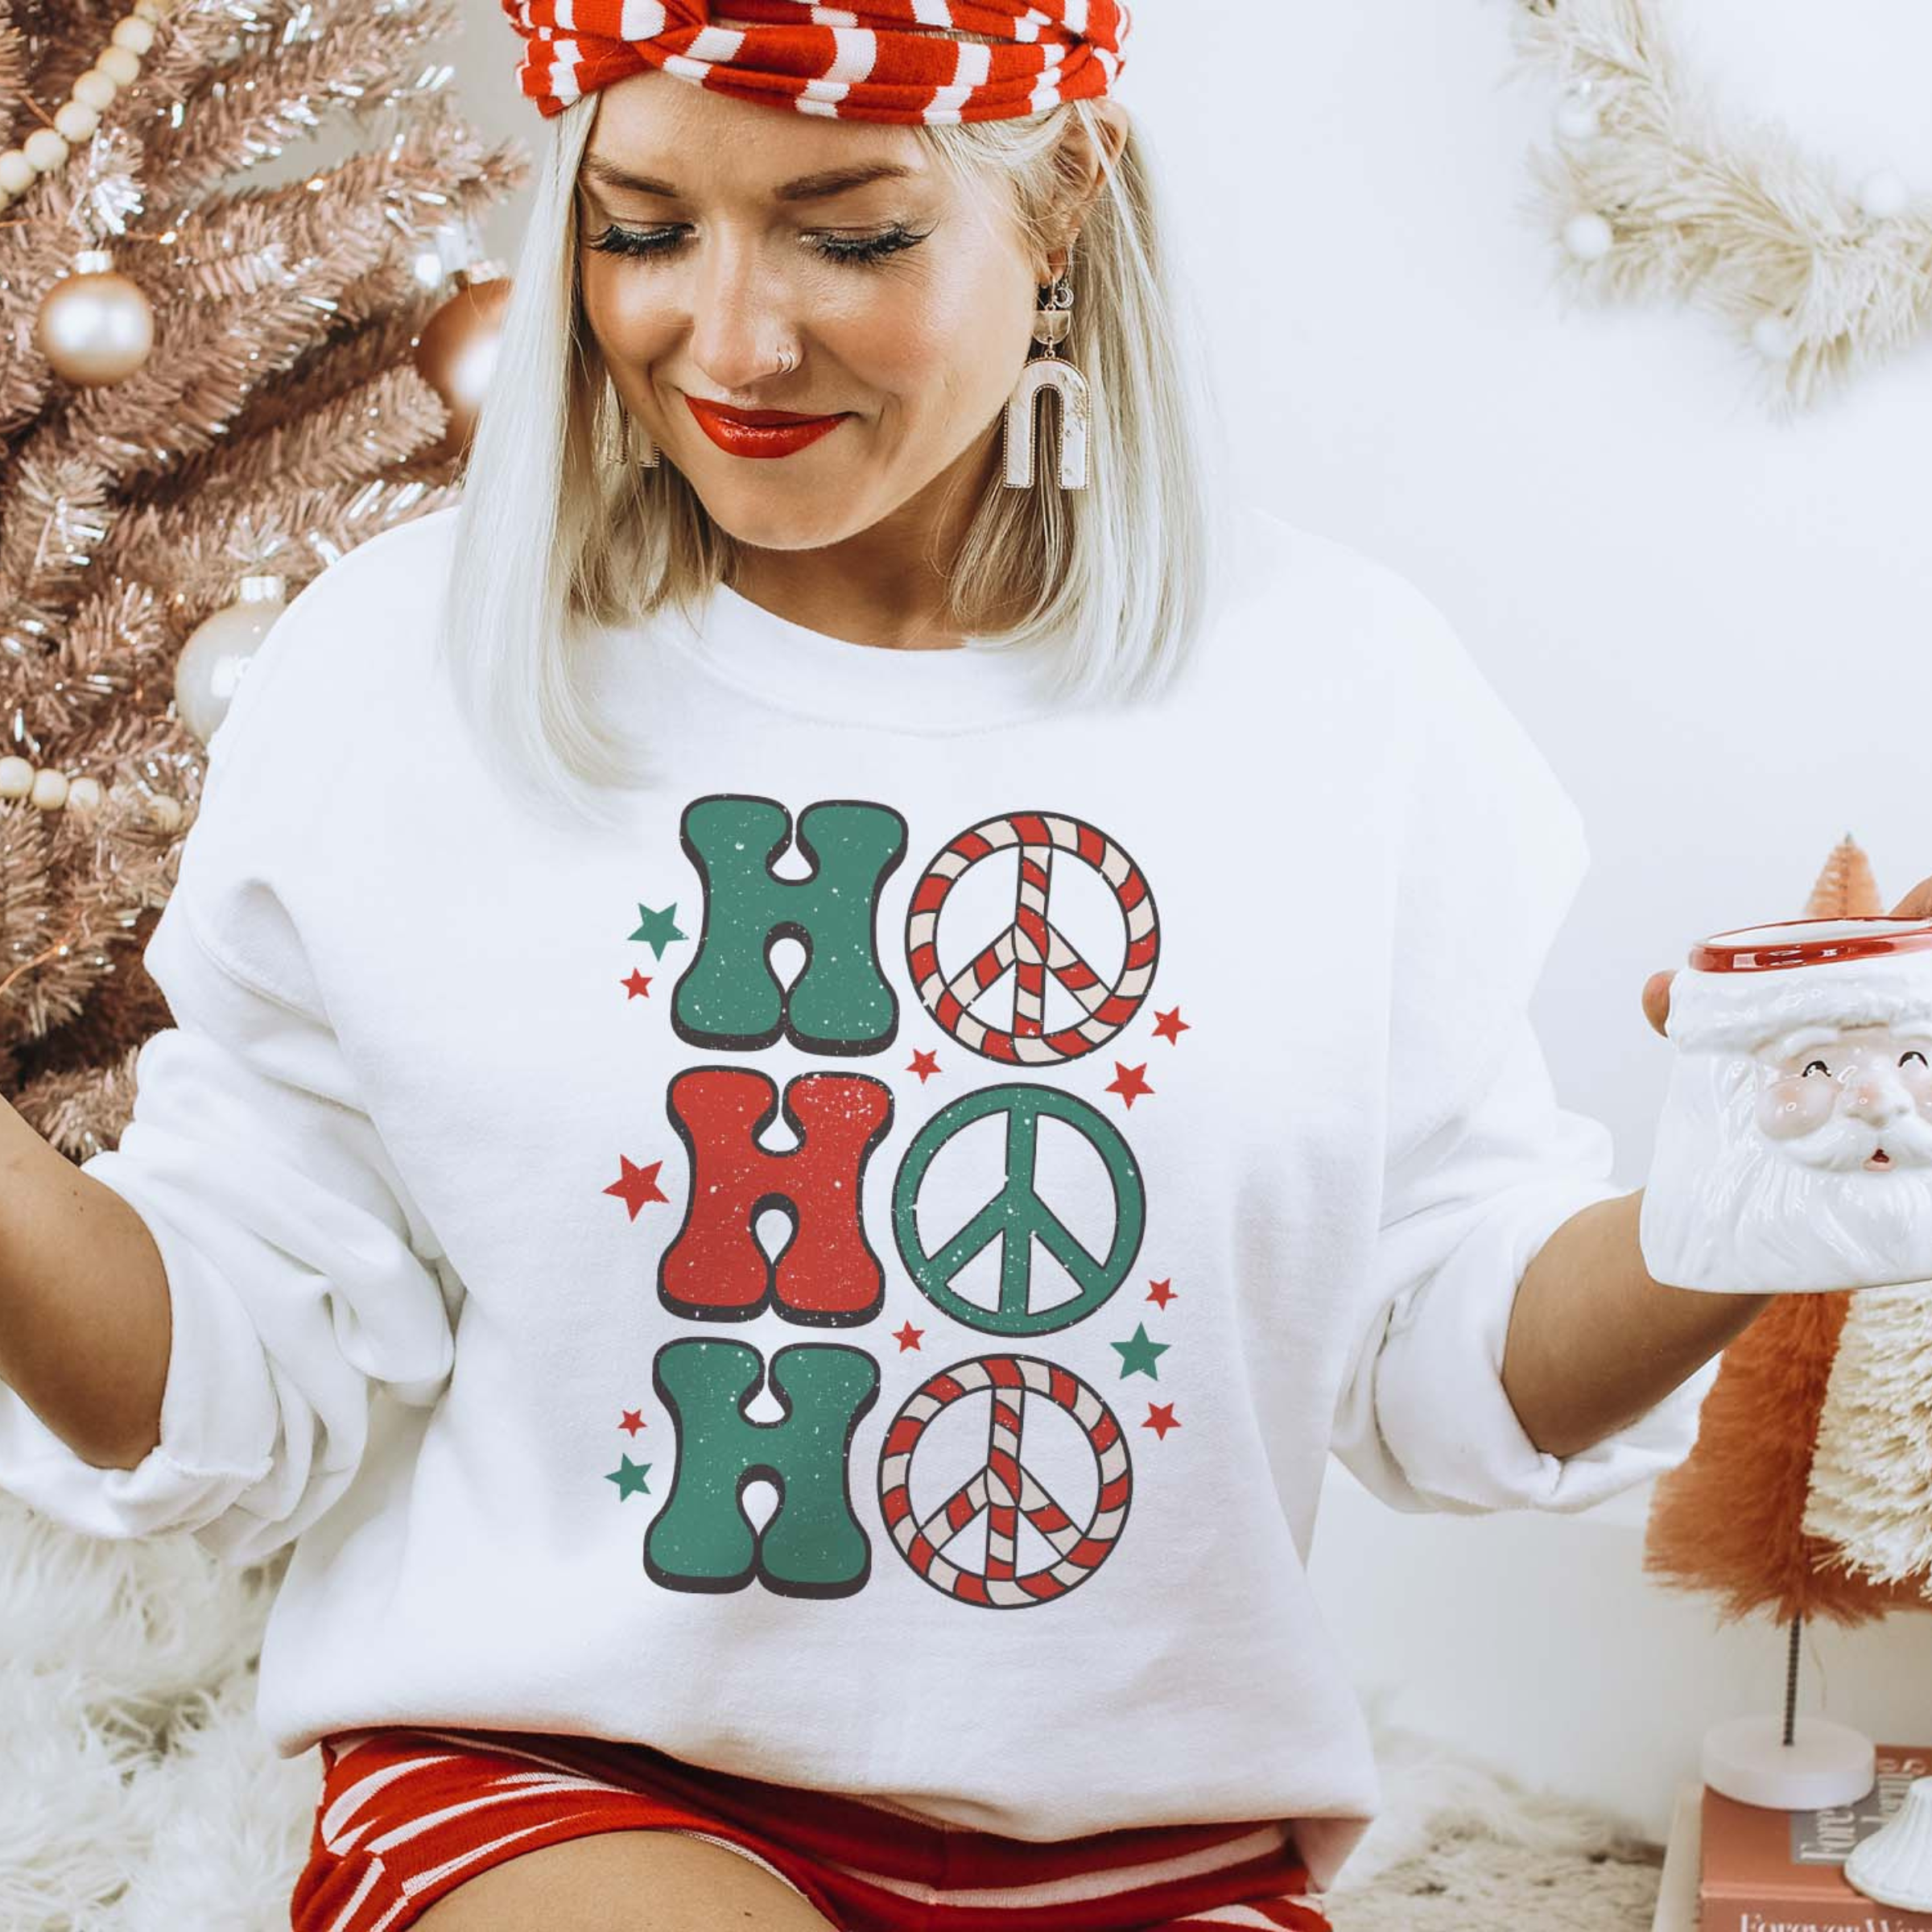 This white sweatshirt includes a crew neckline, long sleeves, and a graphic that says "Ho Ho Ho" in a mix of cute font in red and green. The O's are peace signs and stars are all around the graphic. This is modeled with a red and white striped headband, white earrings, and a pair of red and white striped shorts. The model has rolled the sleeves and is also holding a Santa Clause mug. 